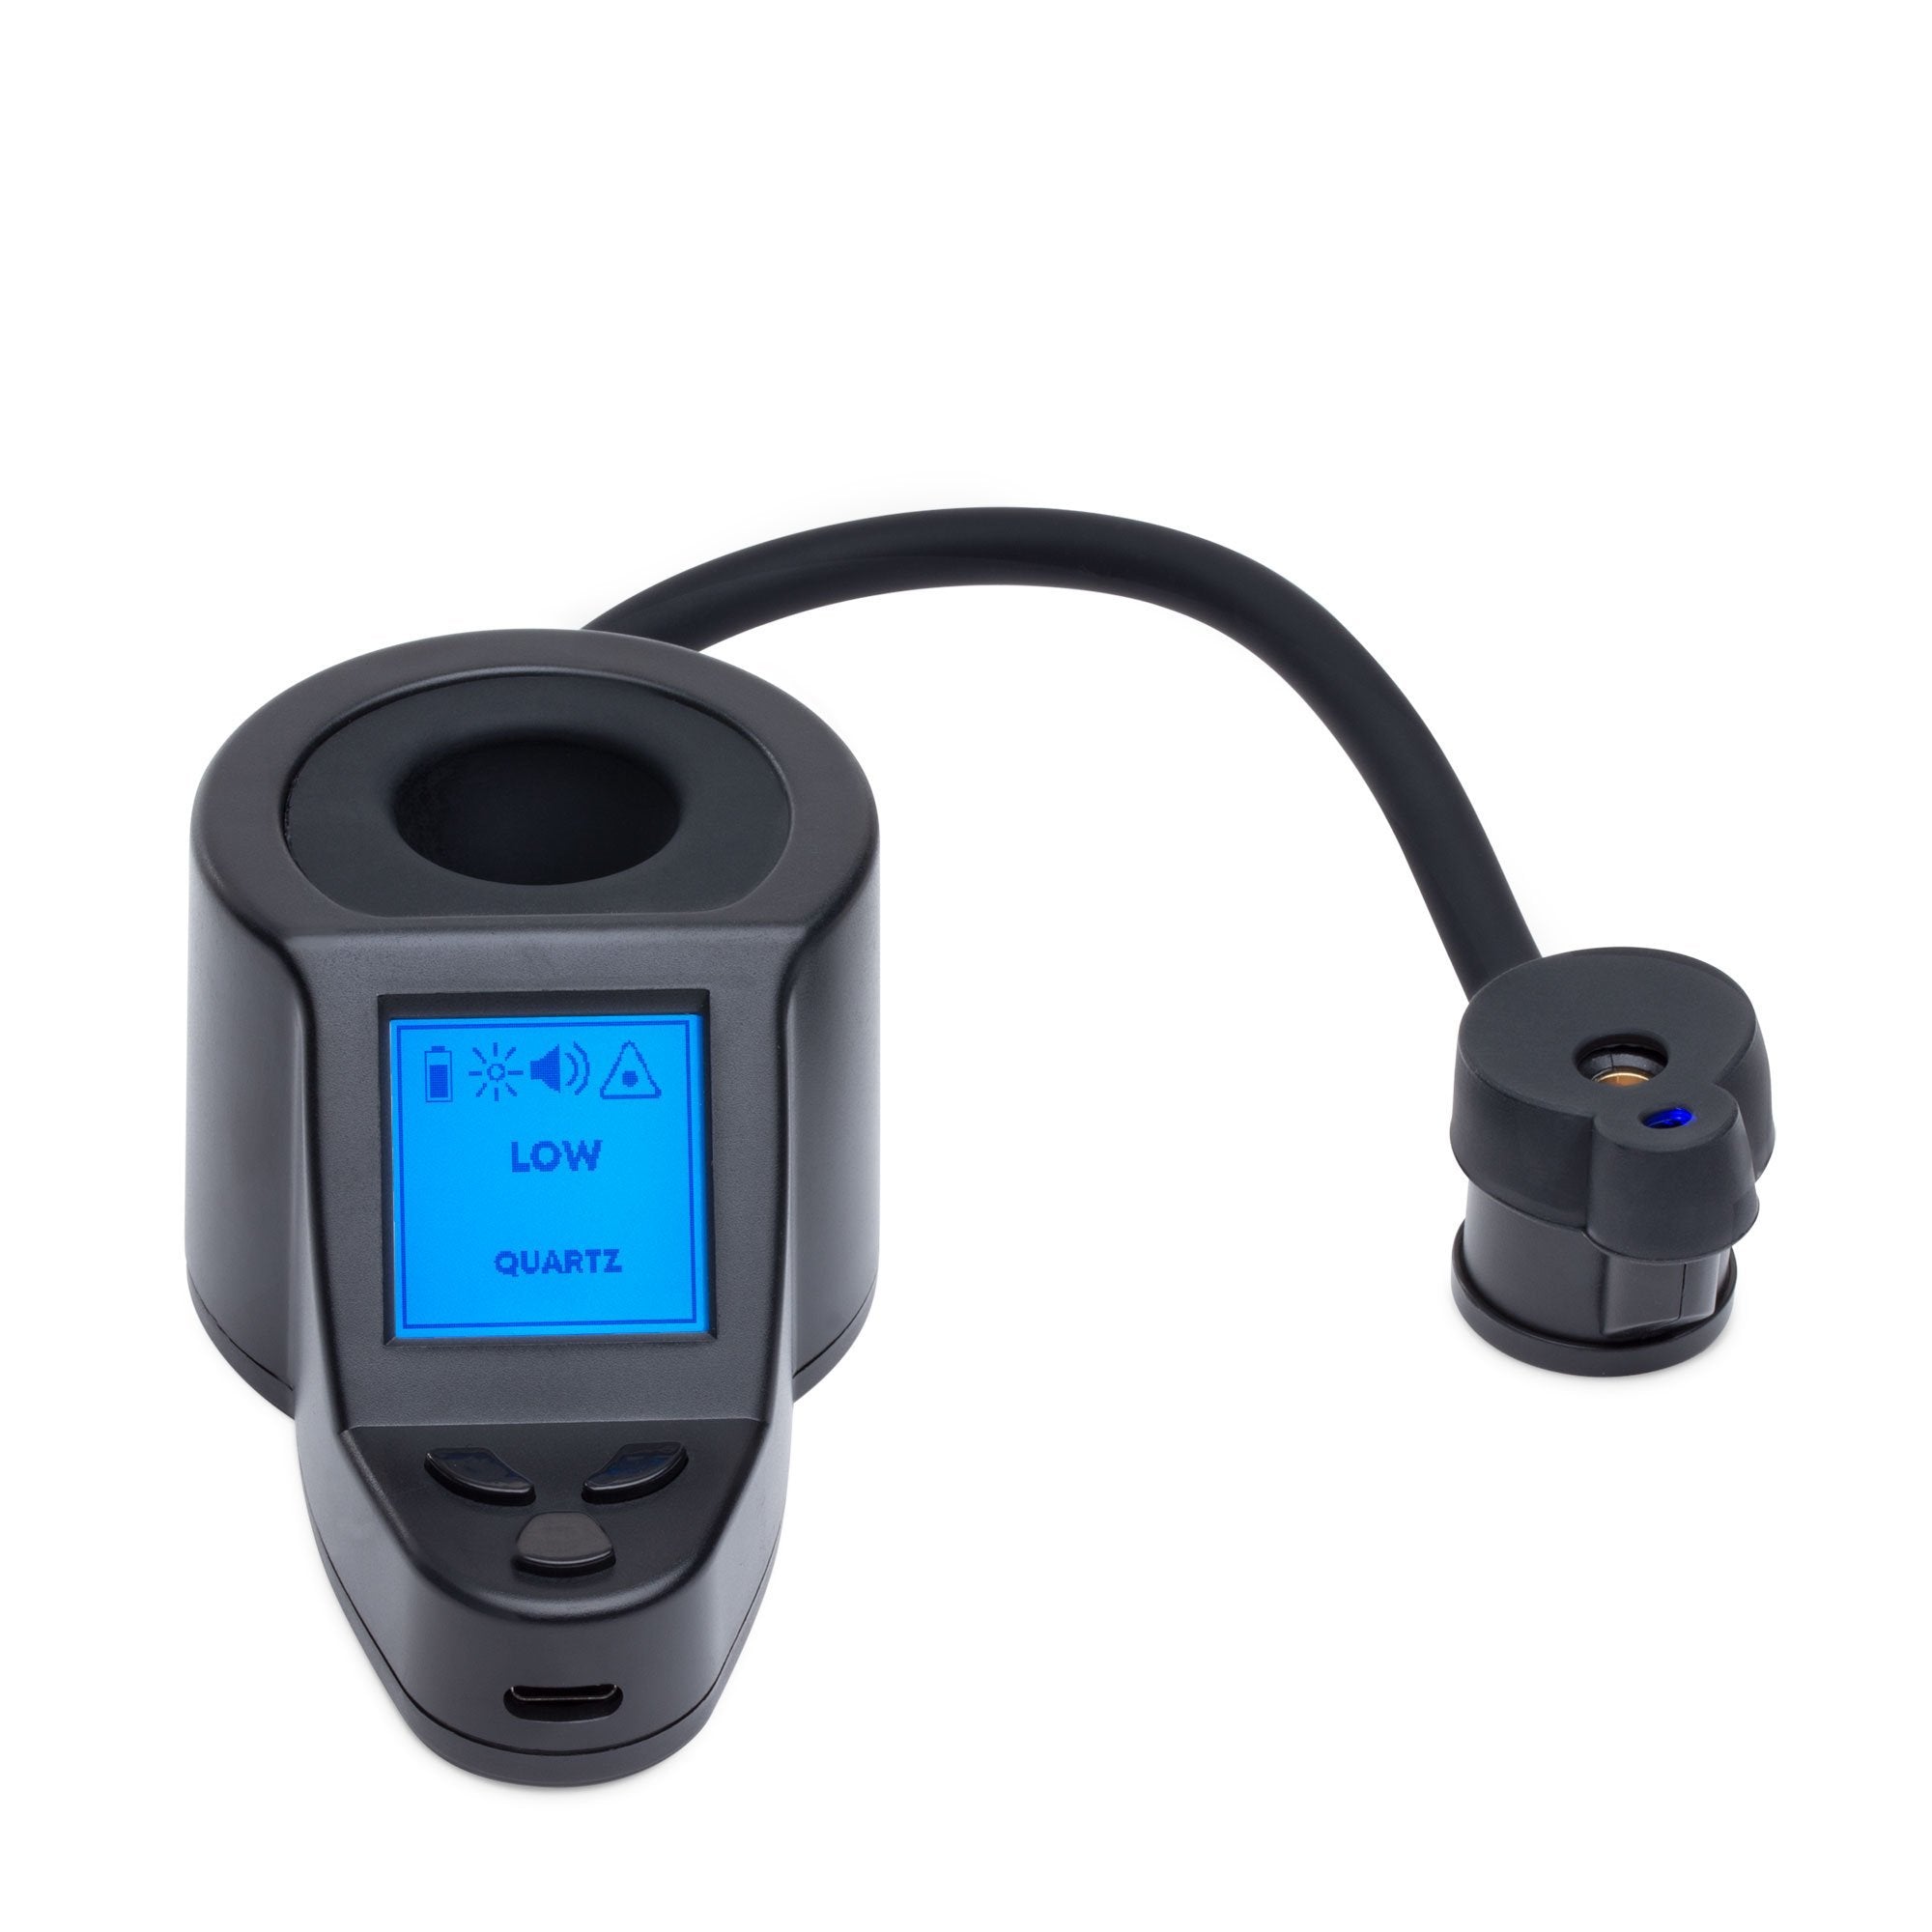 Buy Dabbing Thermometers, Dab Temp Readers 2-3 Day Shipping